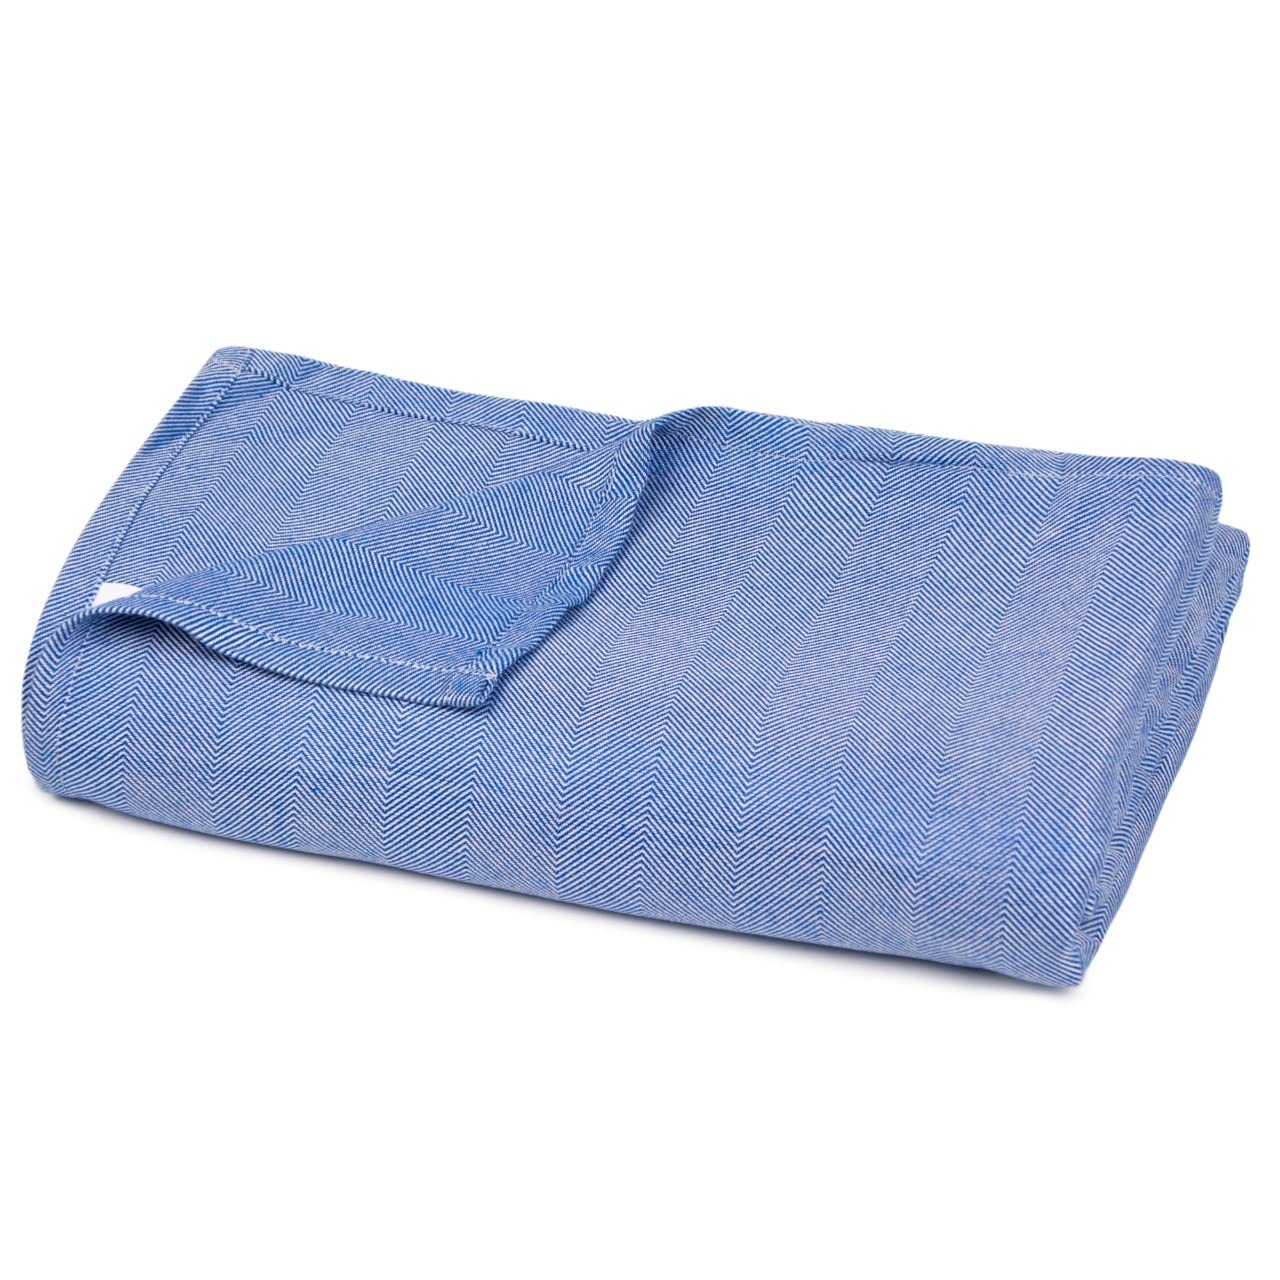 Mush Ultra-Soft, Light Weight & Thermoregulating, All Season 100% Bamboo Blanket (Navy Blue, Large - 5 x 7.5 ft)